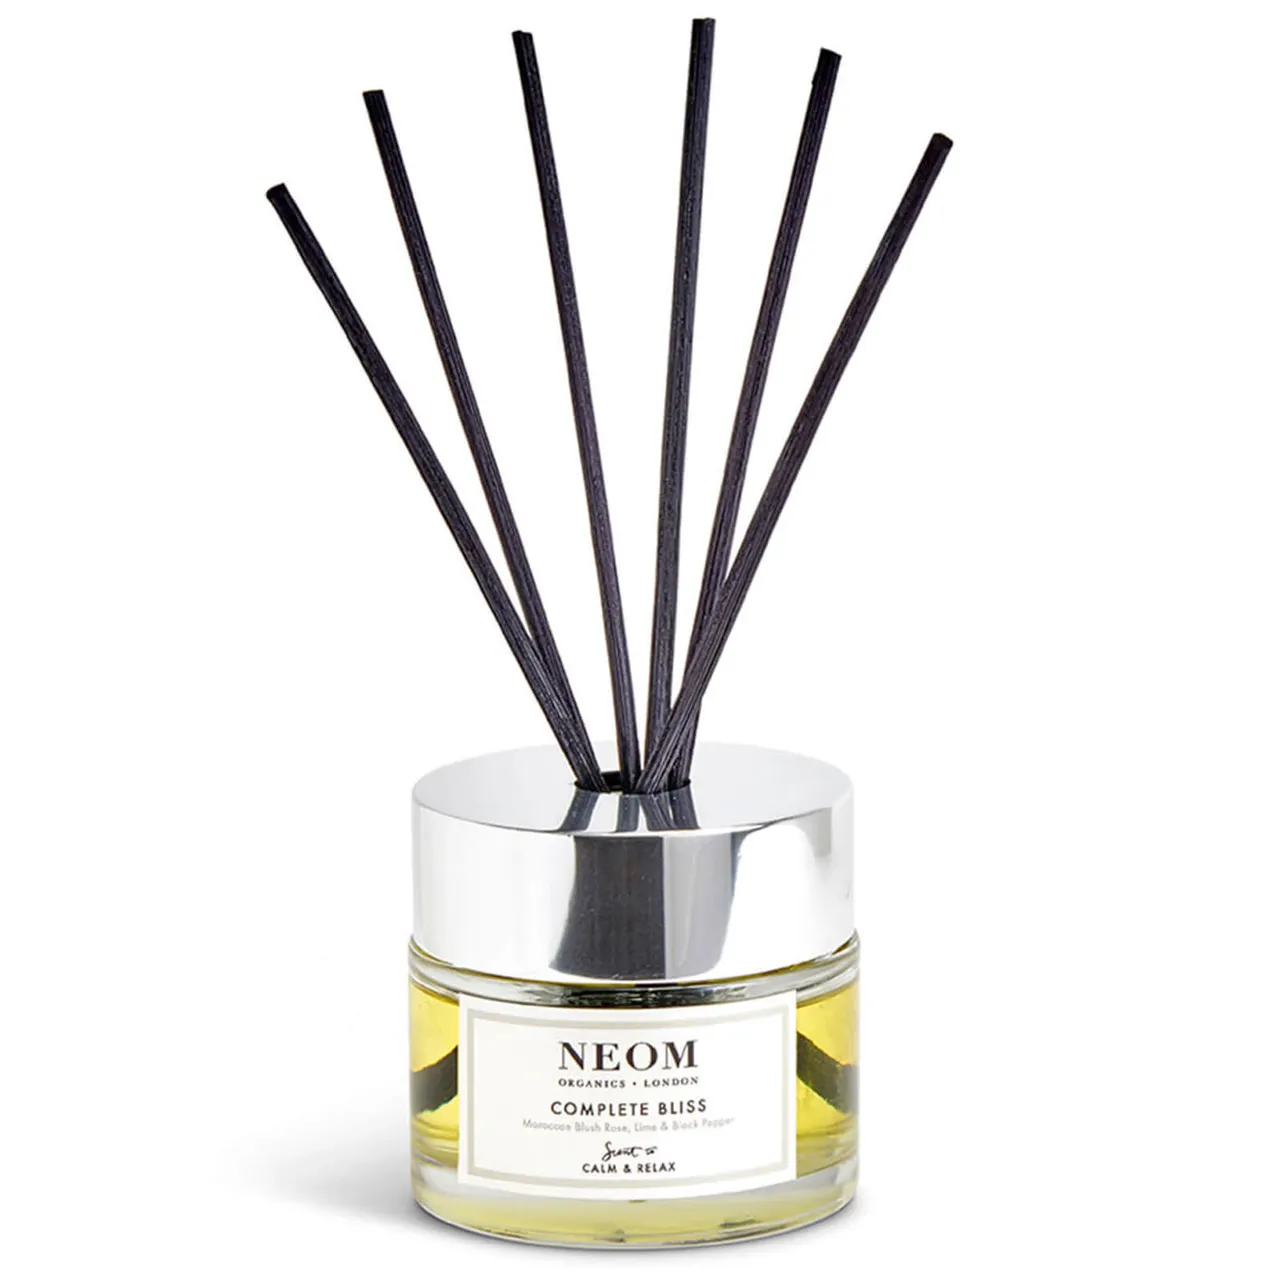 NEOM Organics Reed Diffuser: Complete Bliss (100ml)